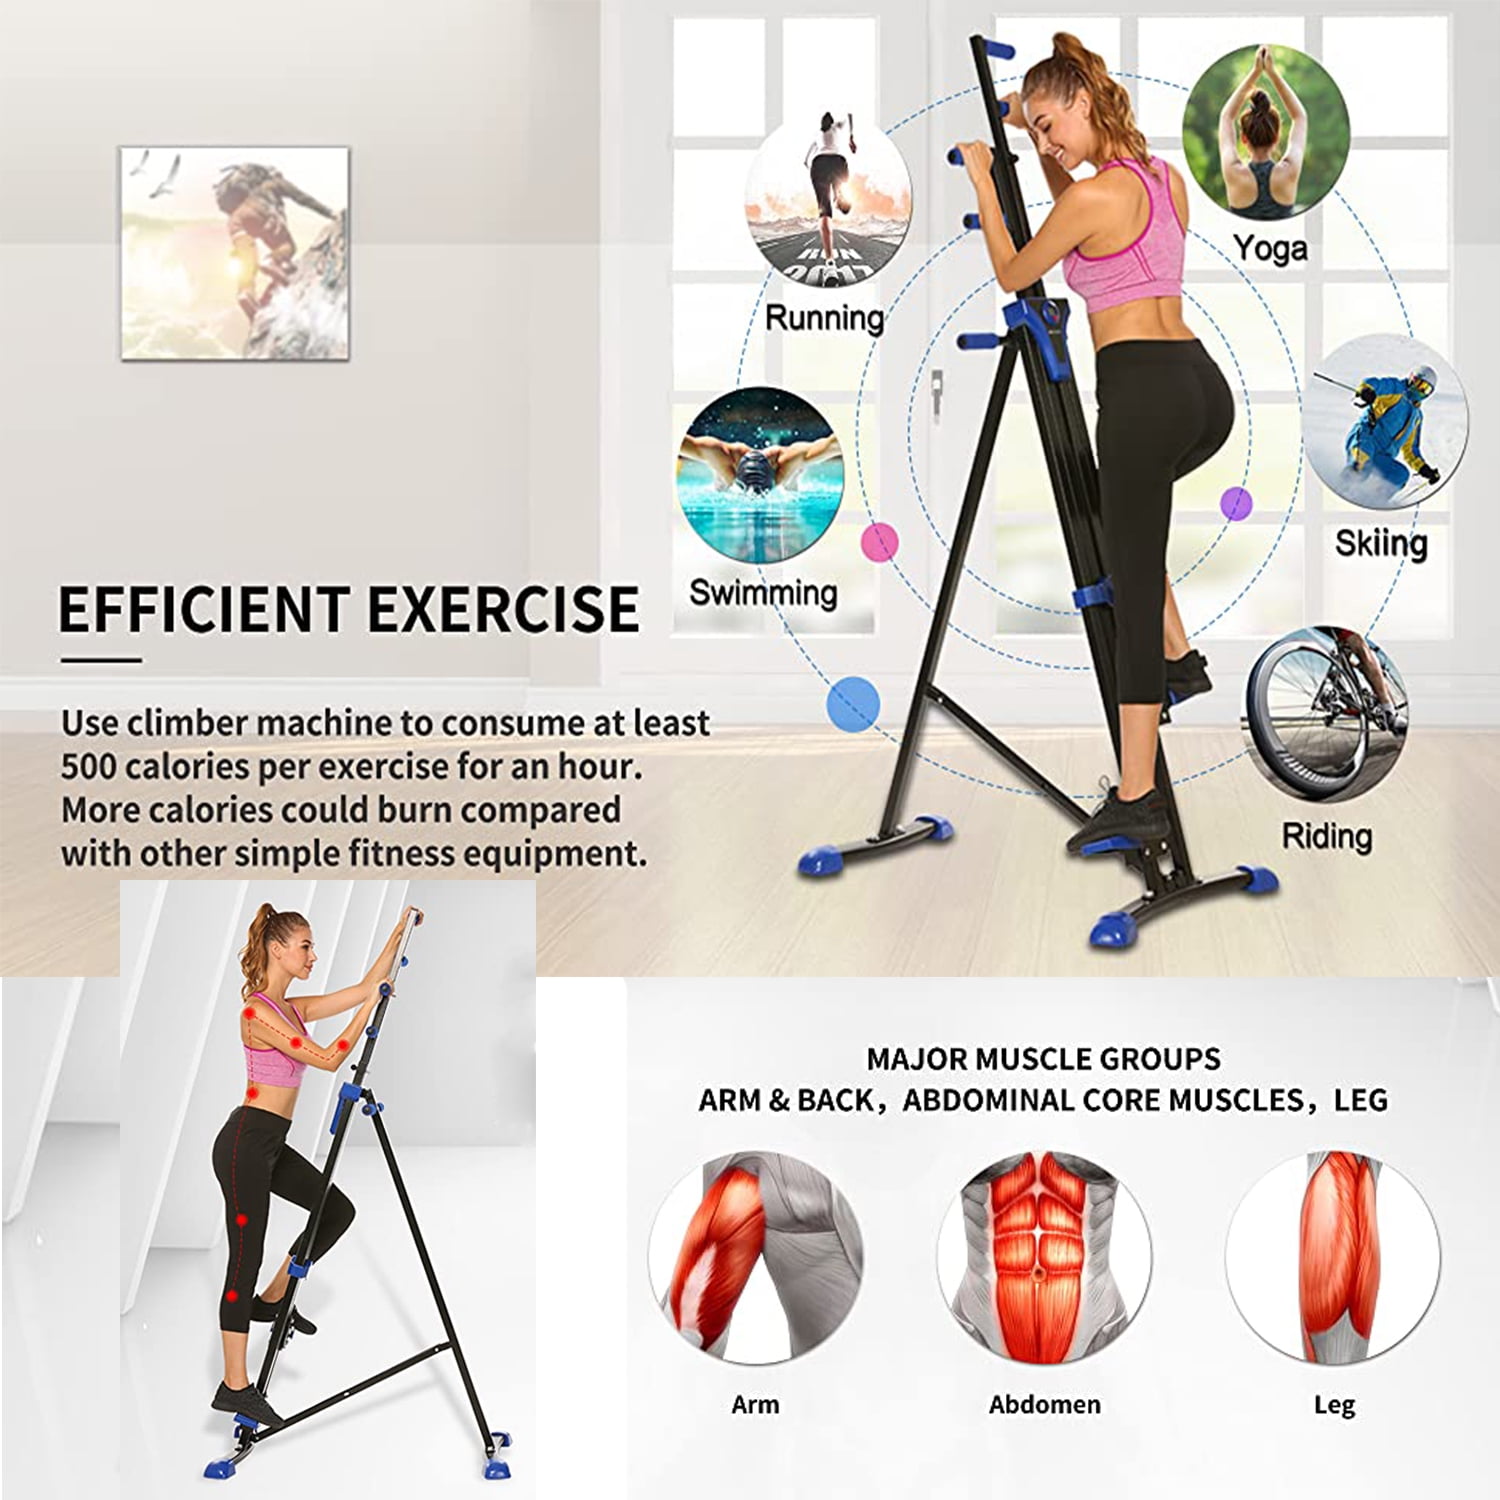 Fitness Sports Device for the Home or Office Zoternen Vertical Climbing Machine Maximum Load 200kg 5 Adjustable Heights Fitness Climber Lifting Stepper Folding with Display 